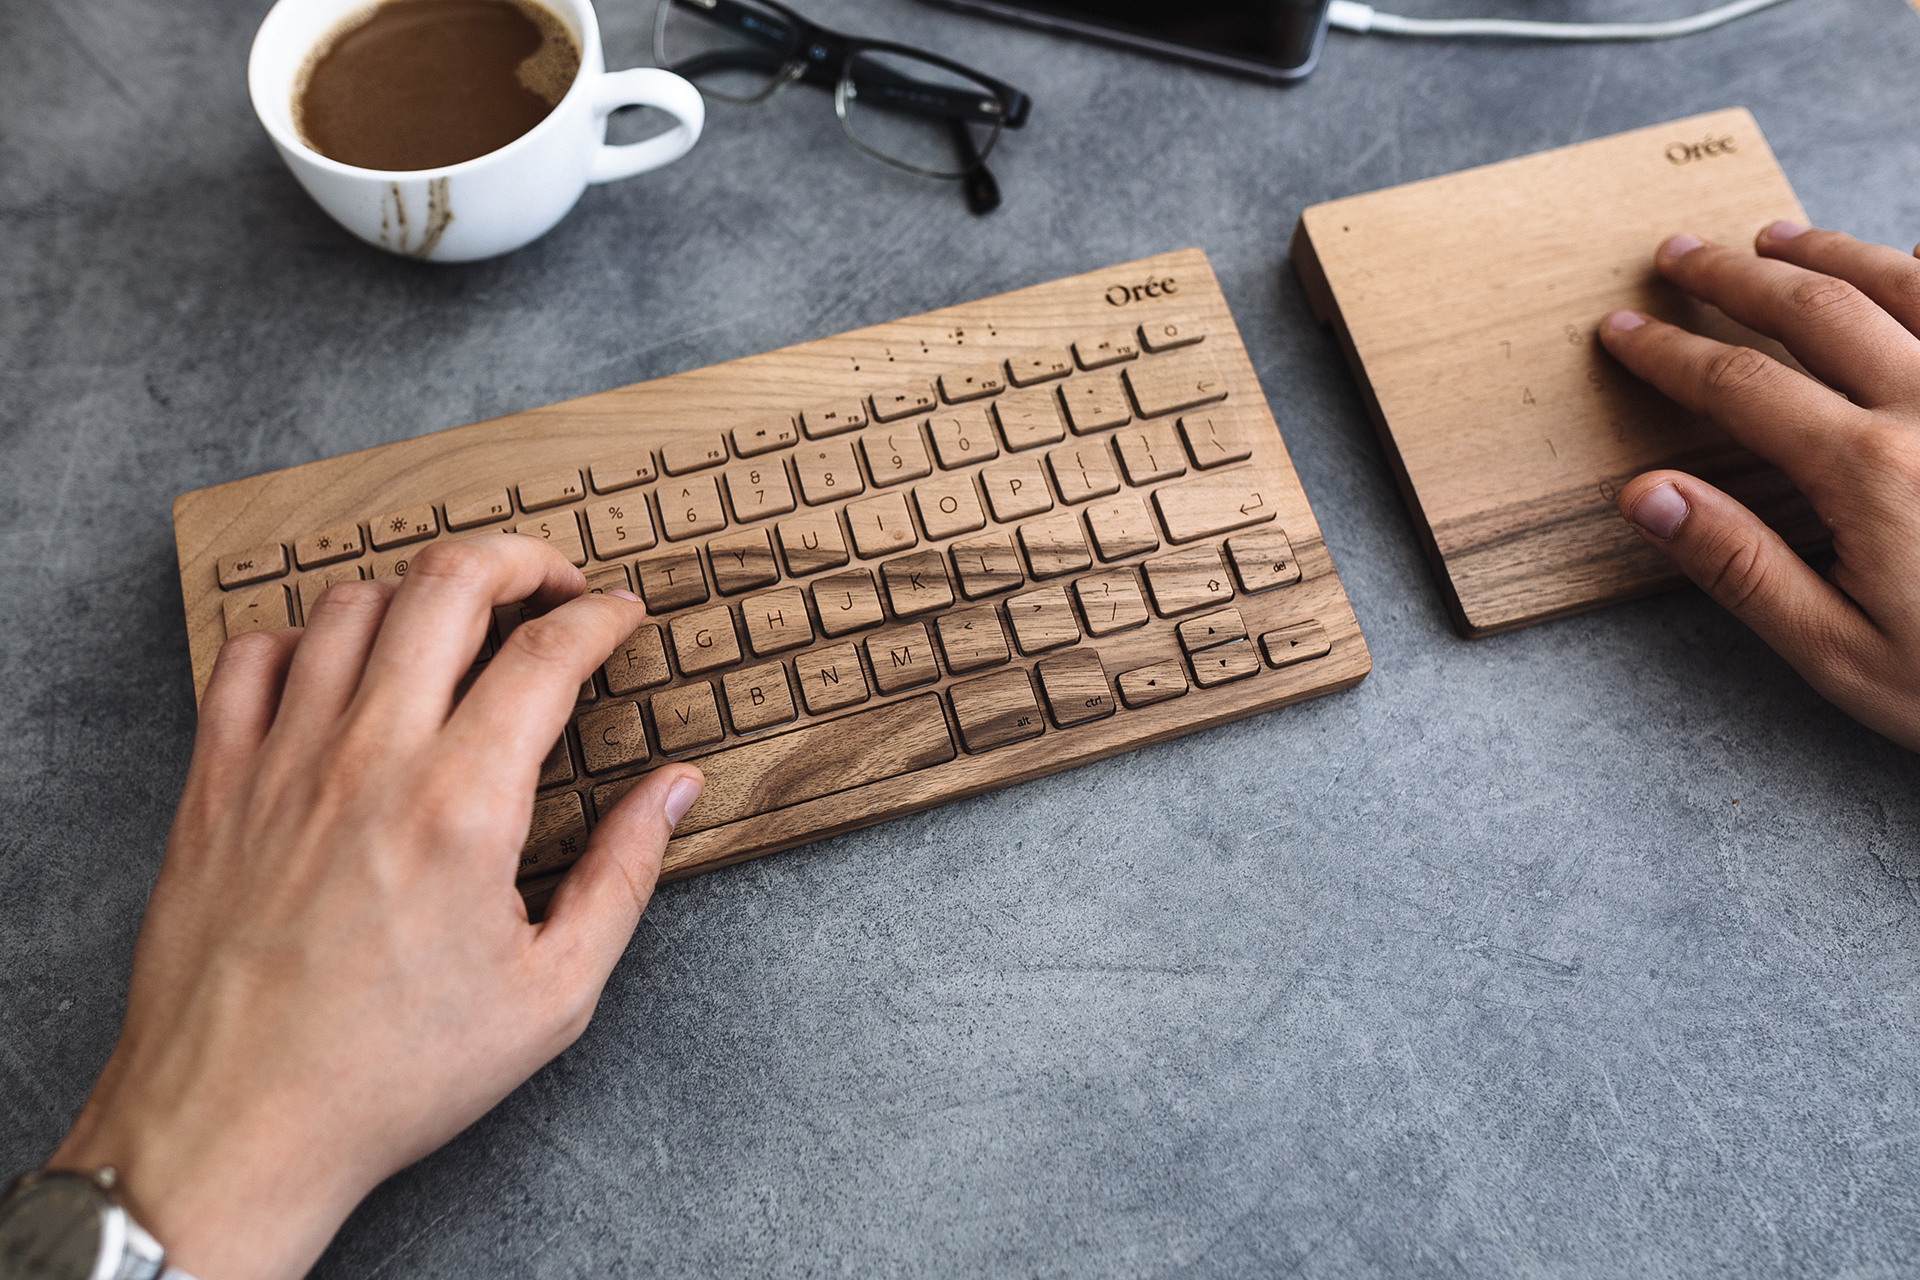 Product Design: Portable Wireless Keyboard by Orée Artisans